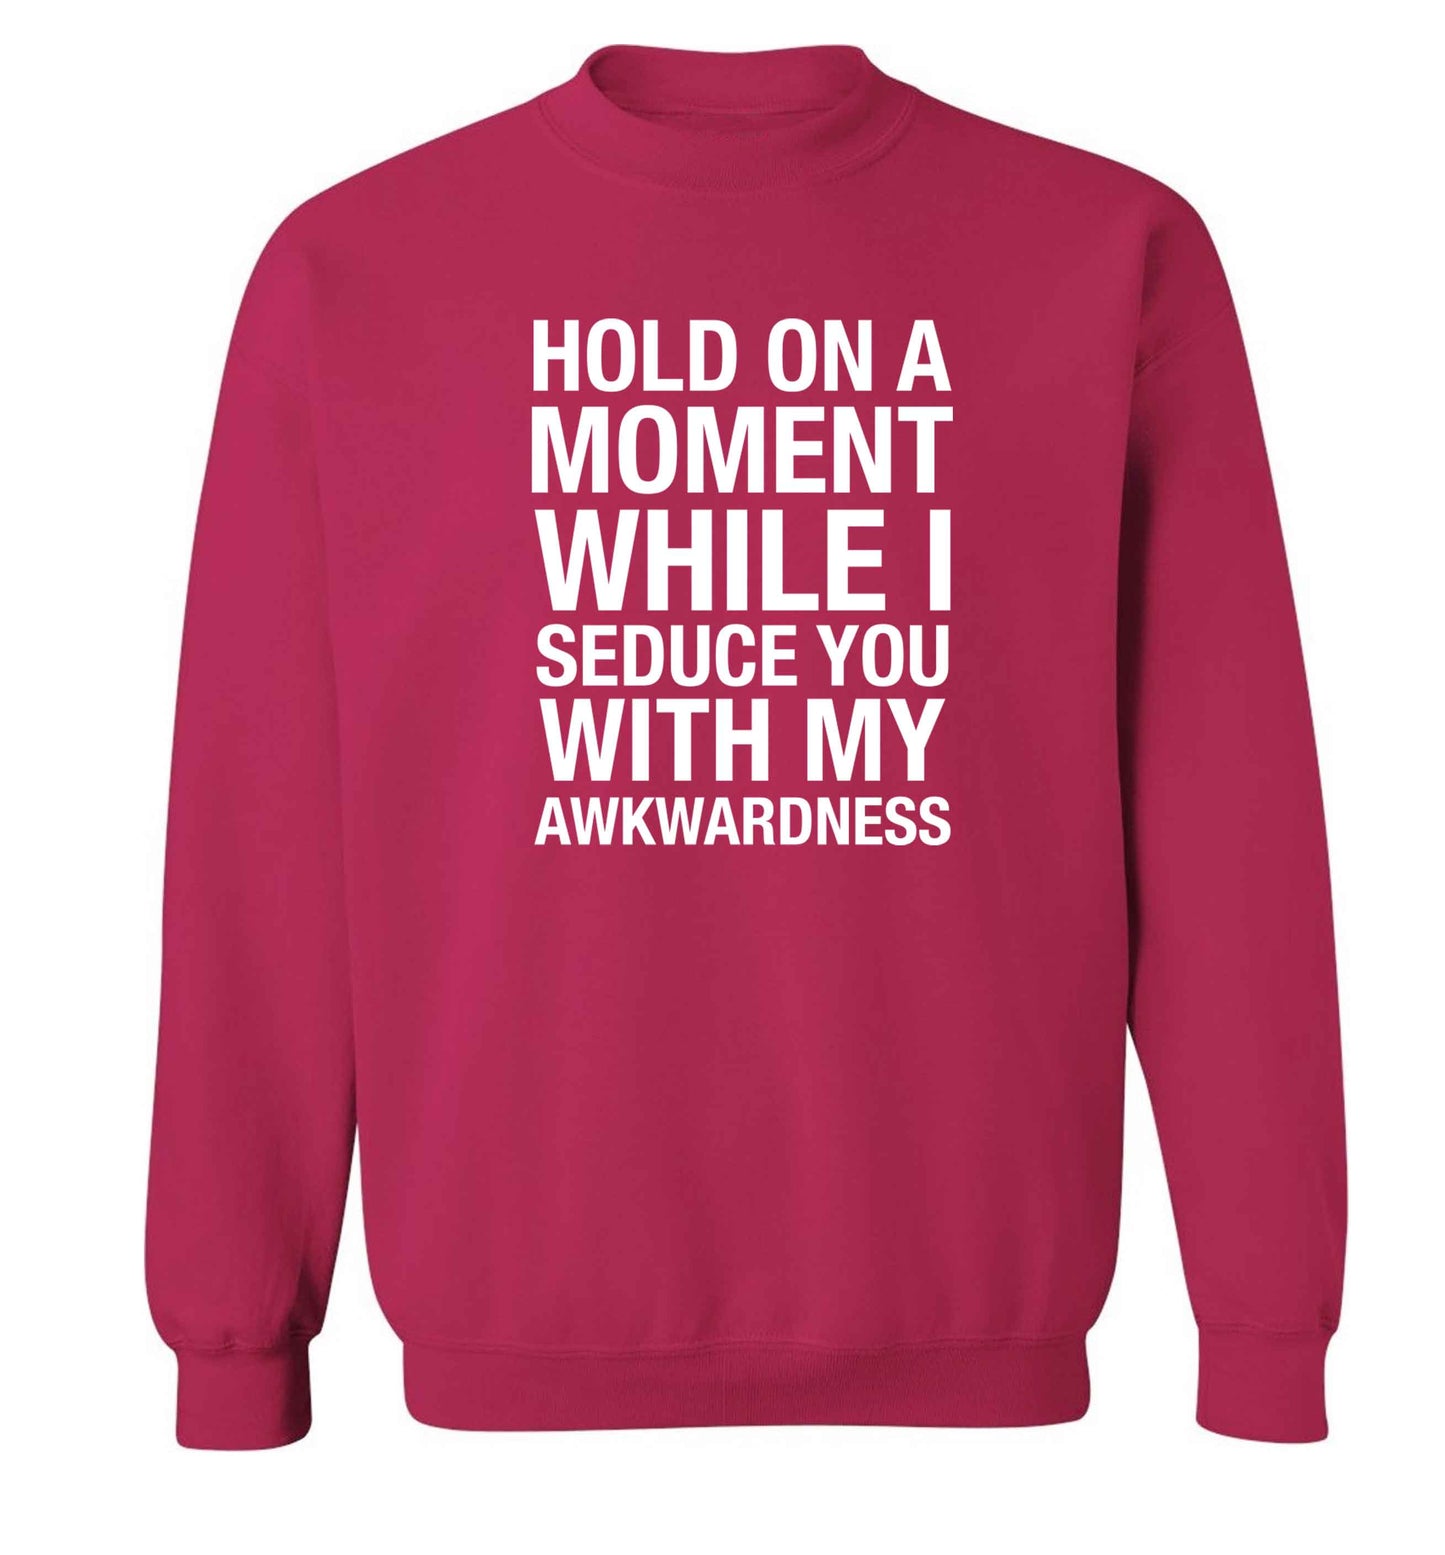 Hold on a moment while I seduce you with my awkwardness adult's unisex pink sweater 2XL